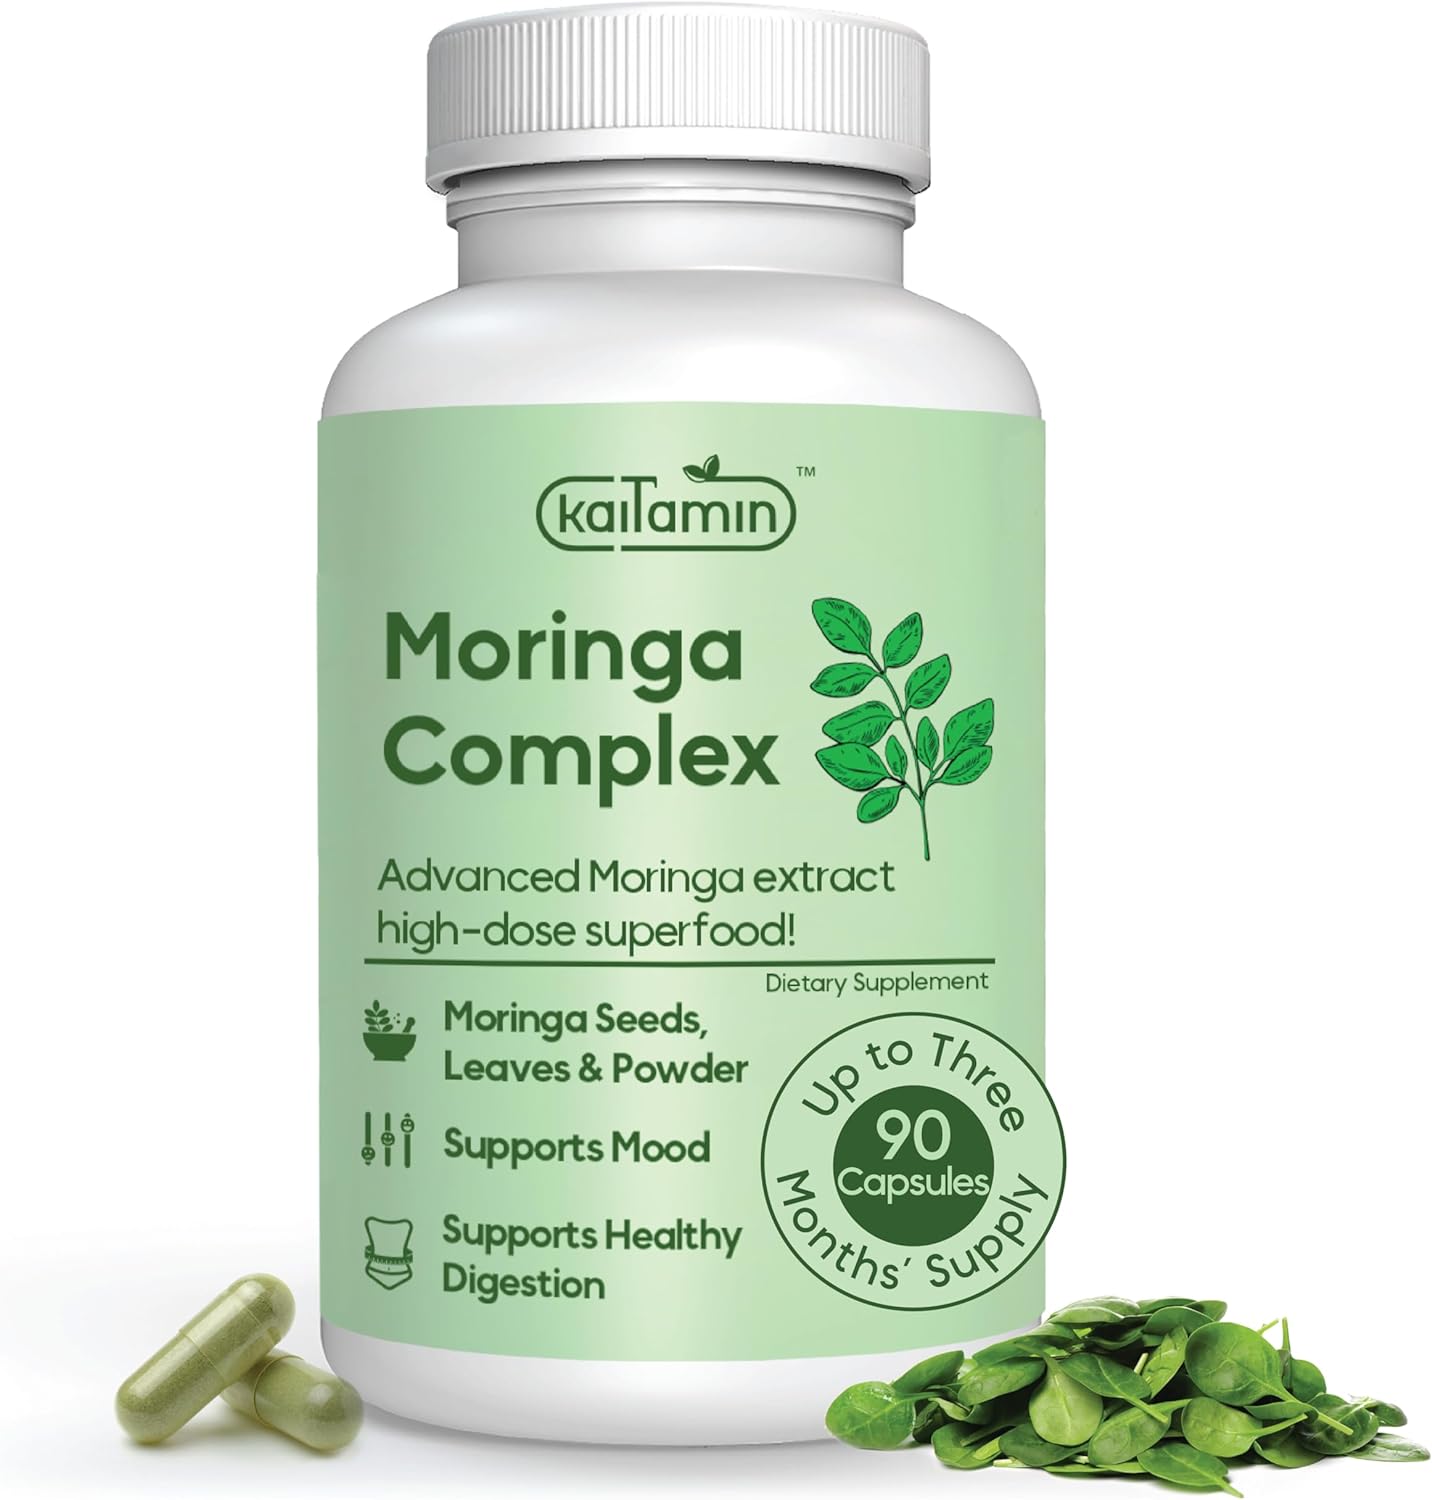 Moringa Oleifera Capsules - Natural Superfood Packed with Vitamins & Minerals for Digestion & Energy - with Antioxidant & Nutritional Support - 1 Pack - 90 Capsules, 90 Days Supply